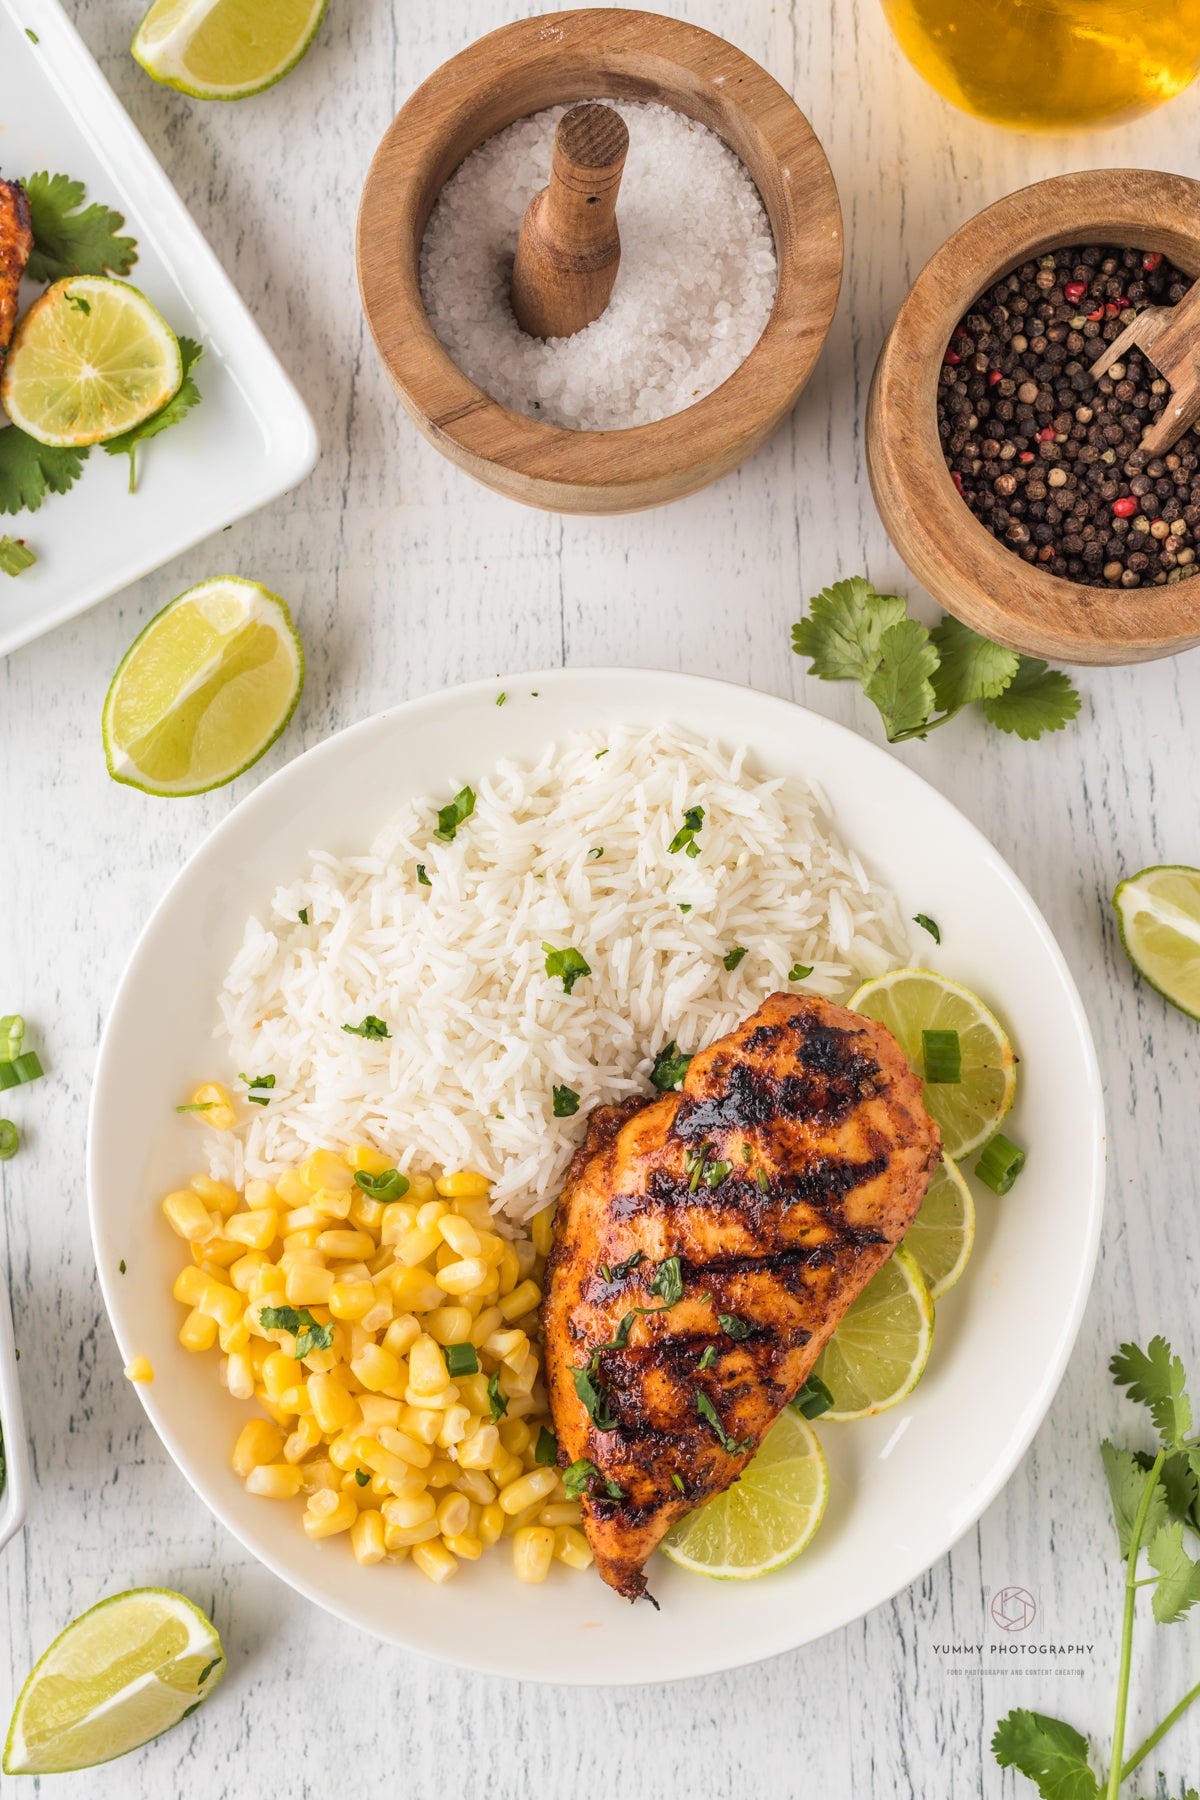 GRILLED MEXICAN CHICKEN